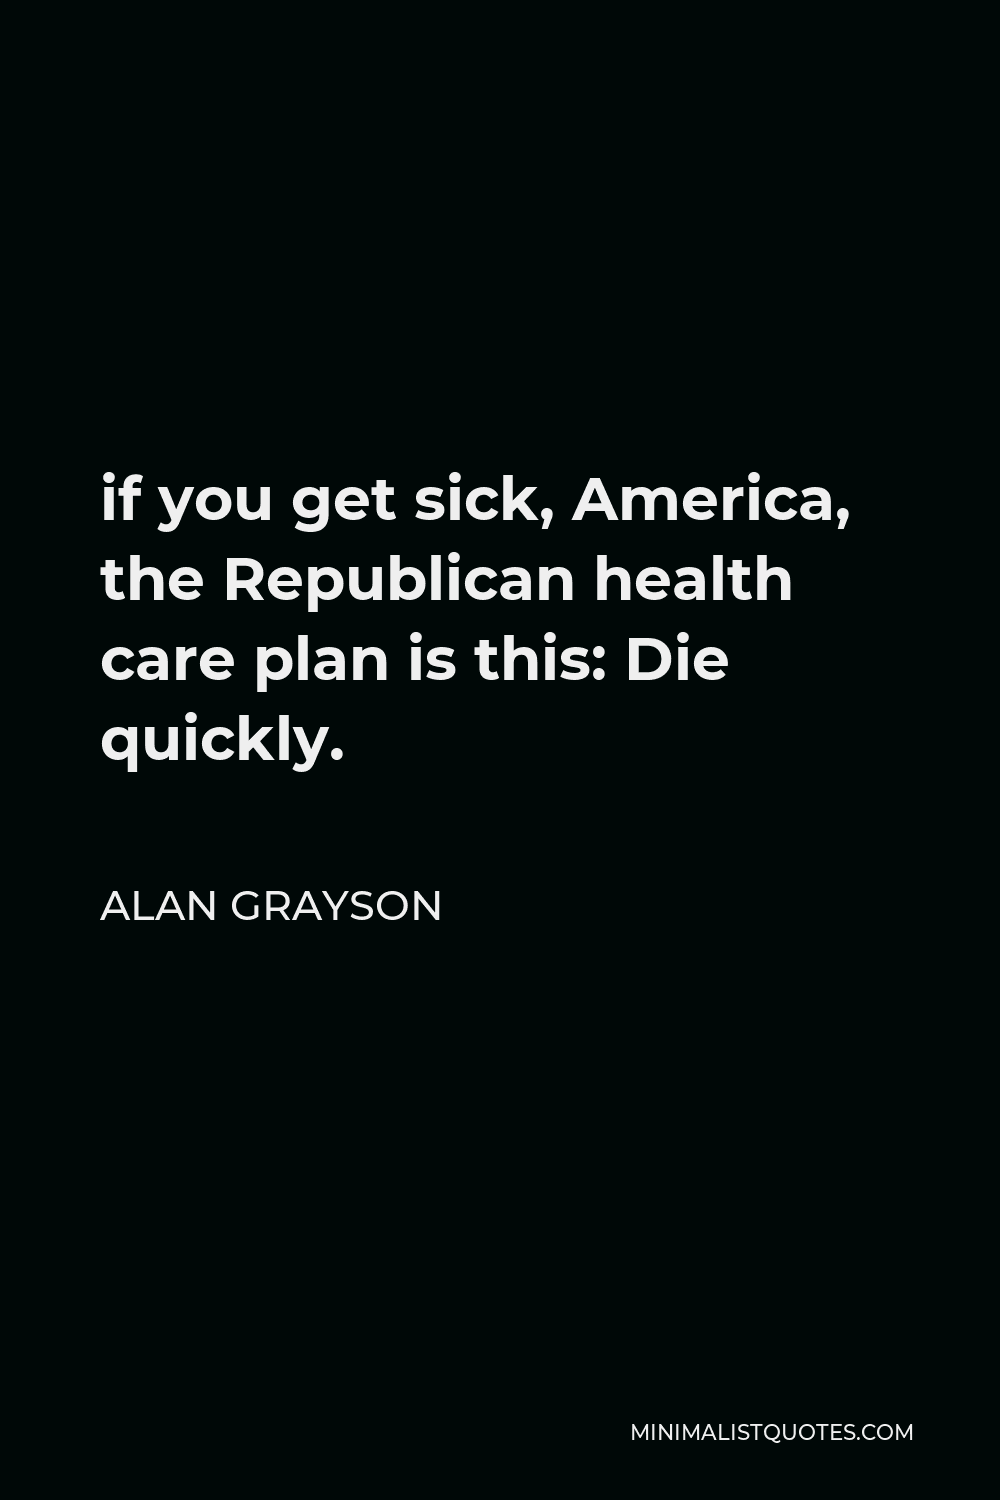 Alan Grayson Quote - if you get sick, America, the Republican health care plan is this: Die quickly.